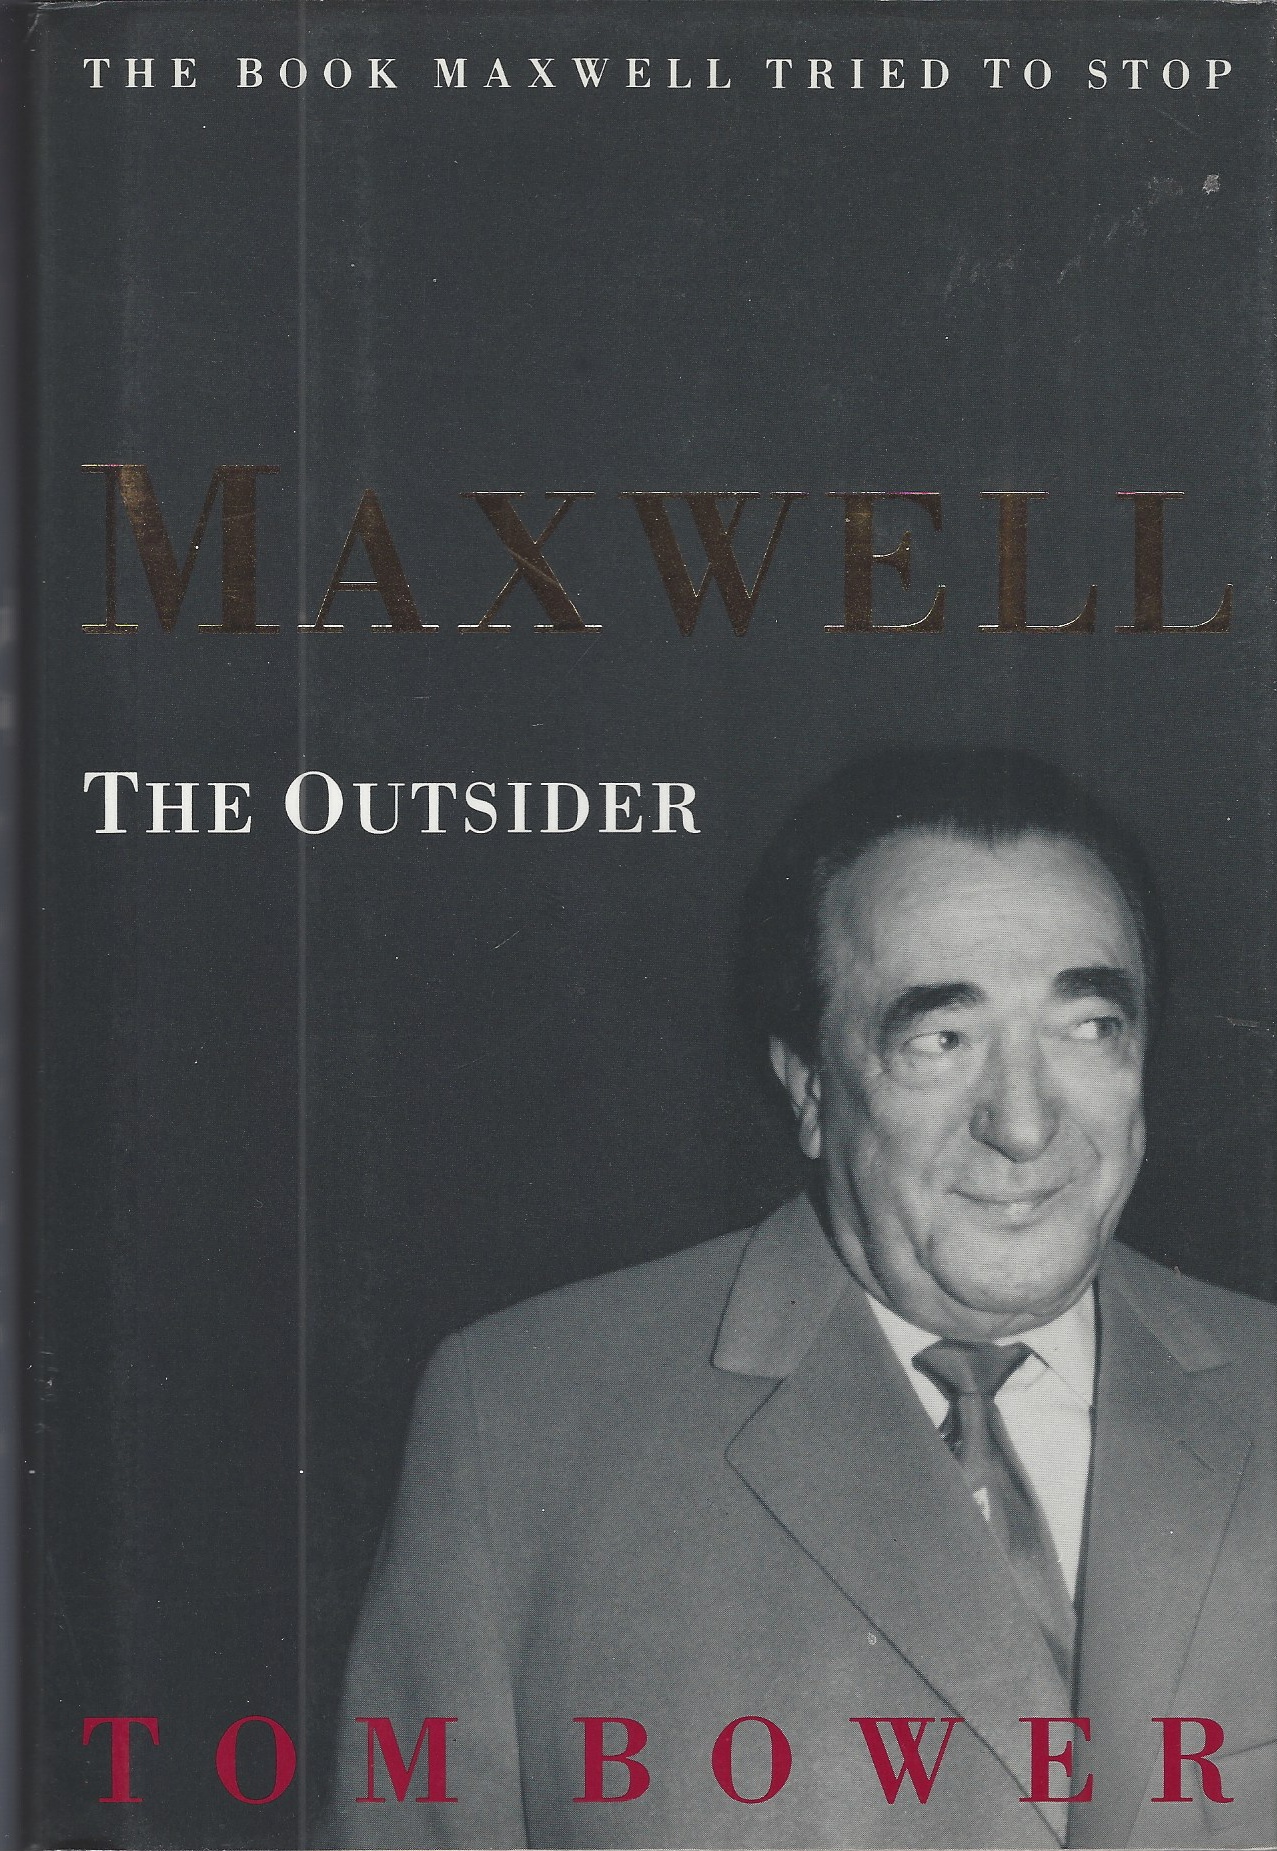 BOWER TOM - Maxwell: The Outsider